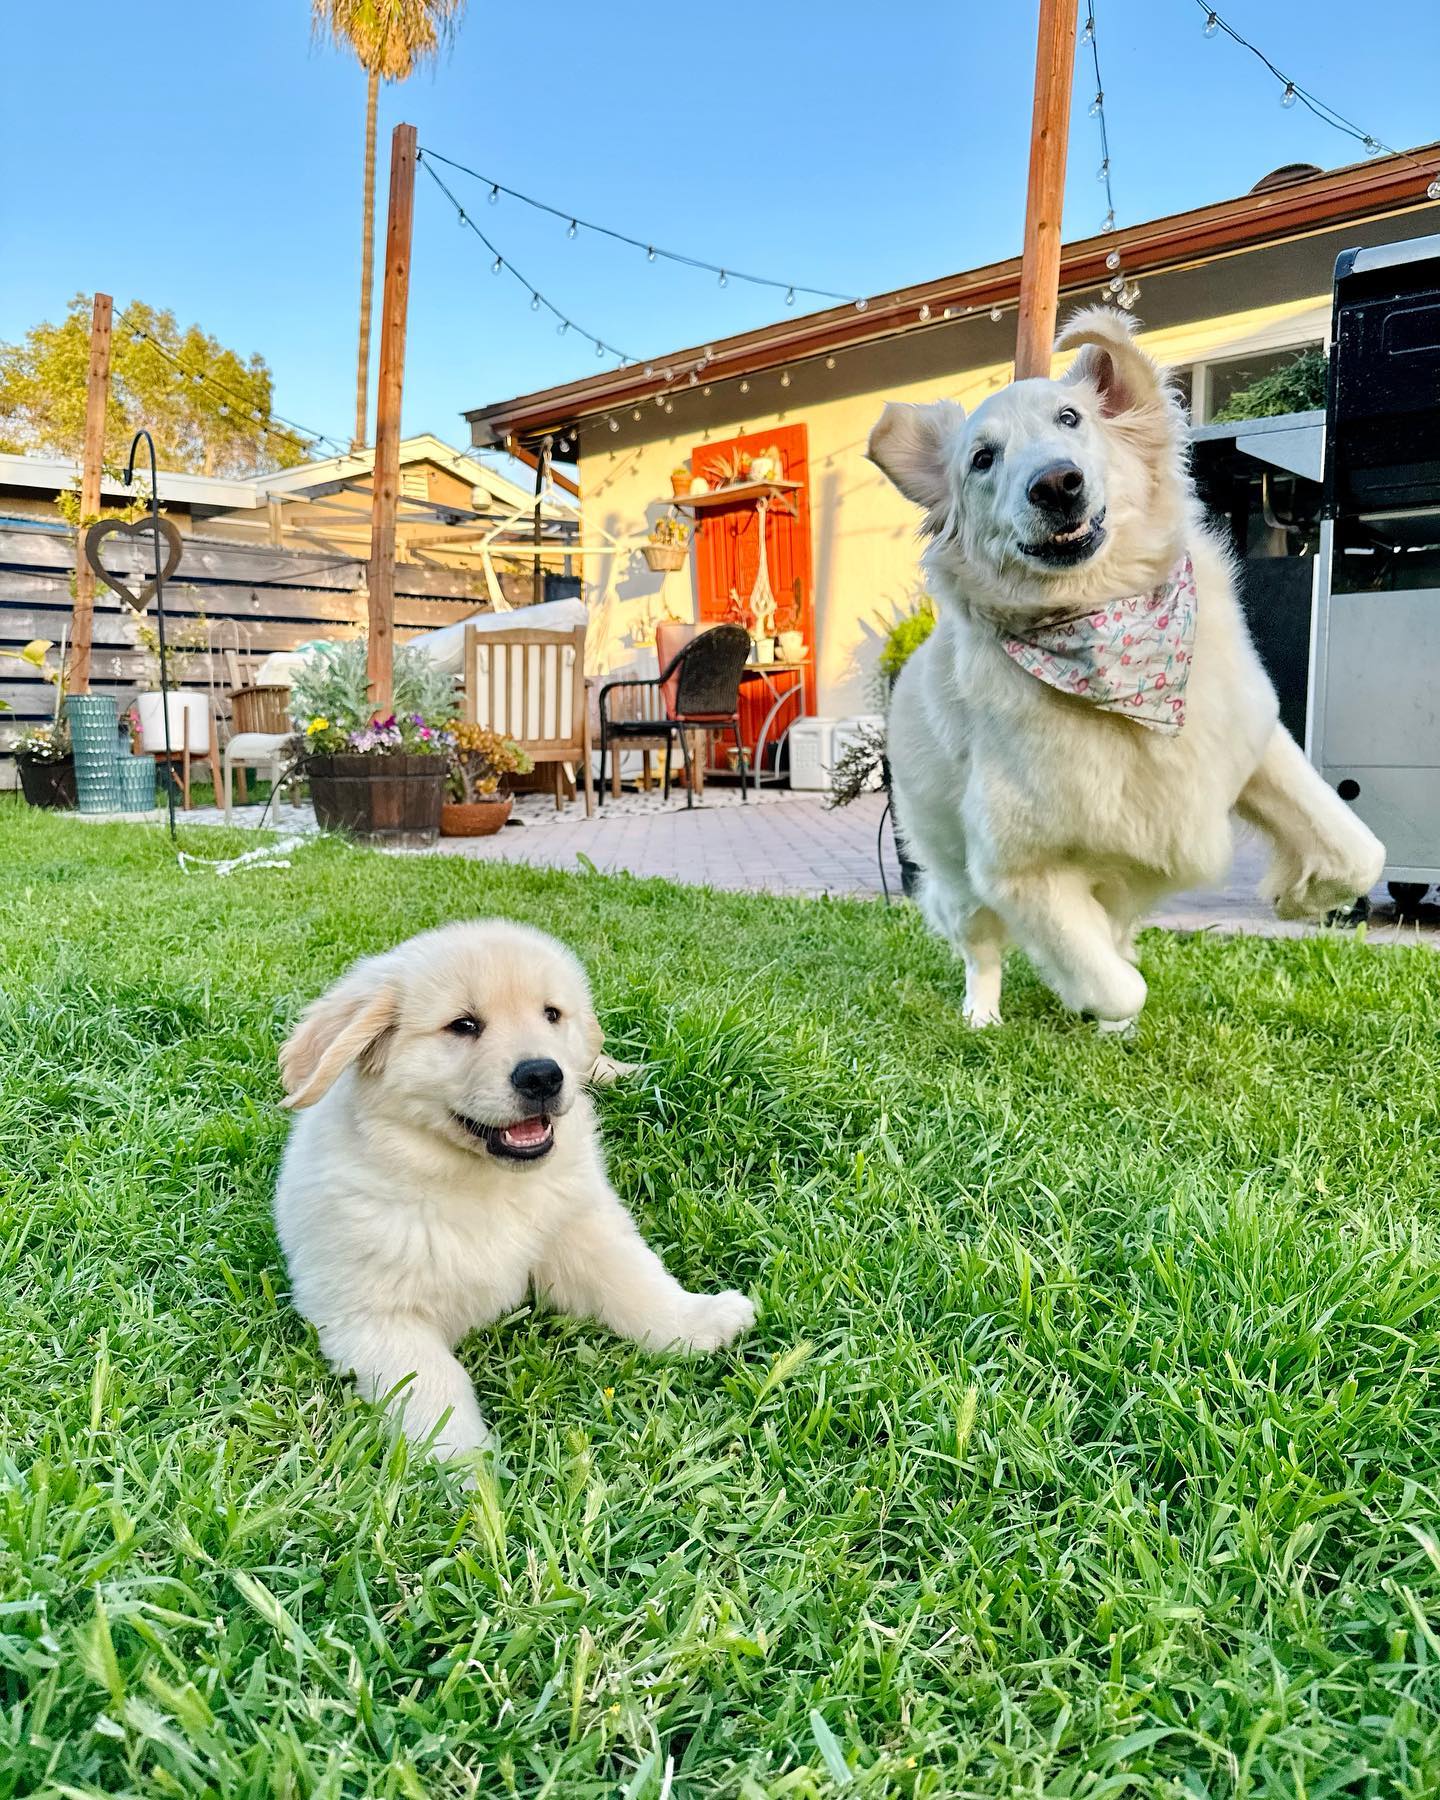 Golden retriever puppy laying in the grass while an adult golden is mid-jump behind it.